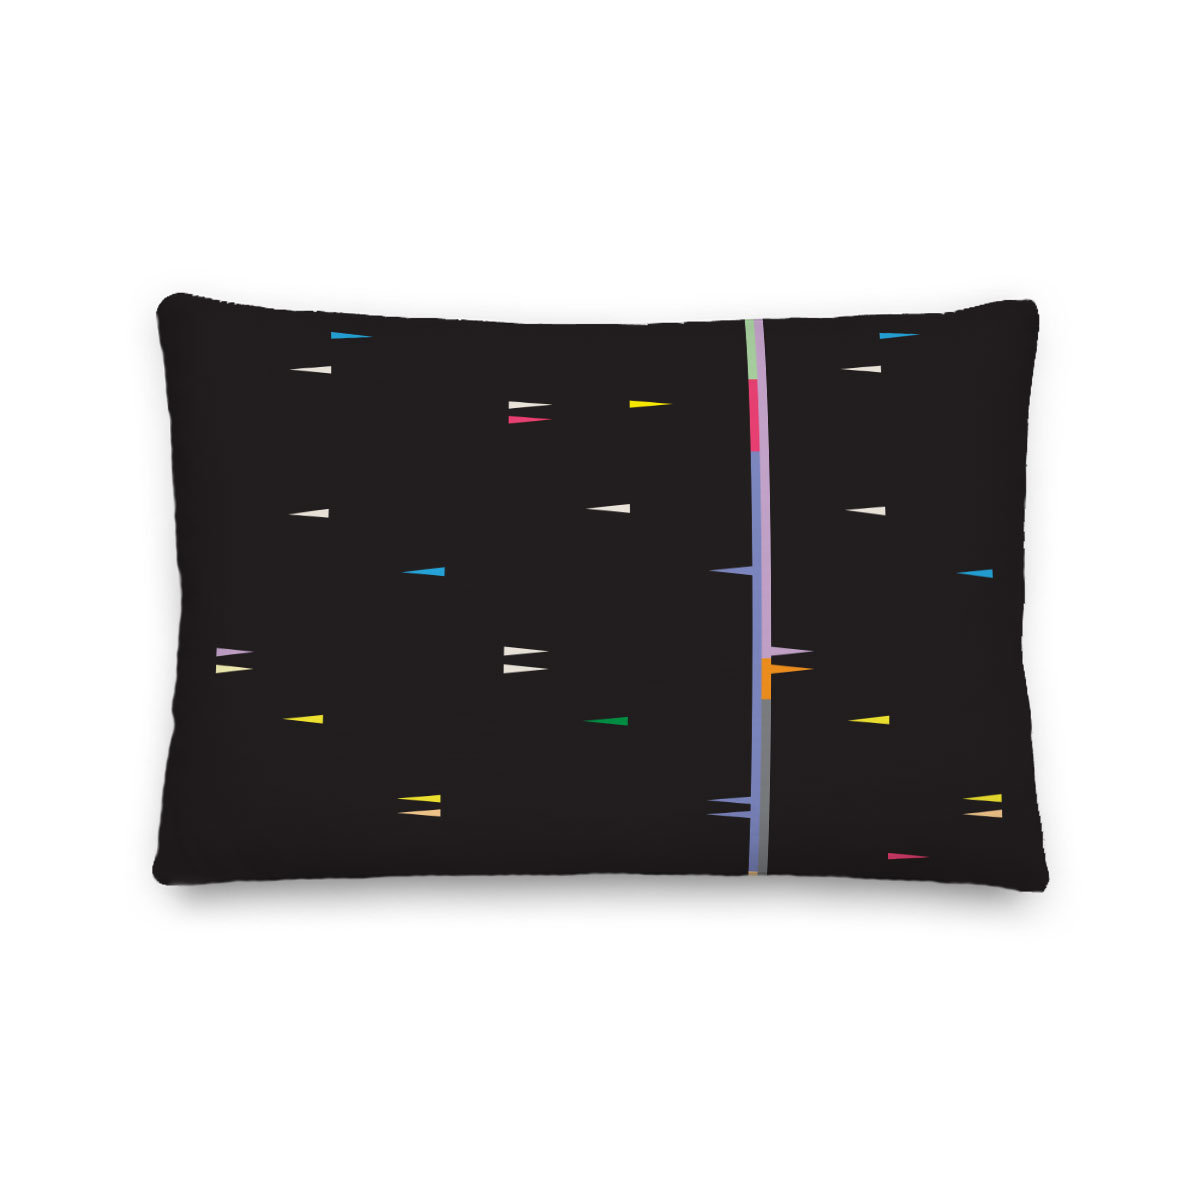 Black Lumbar Pillow with Colorful Triangels (Fula V – dusk) – indoor or outdoor